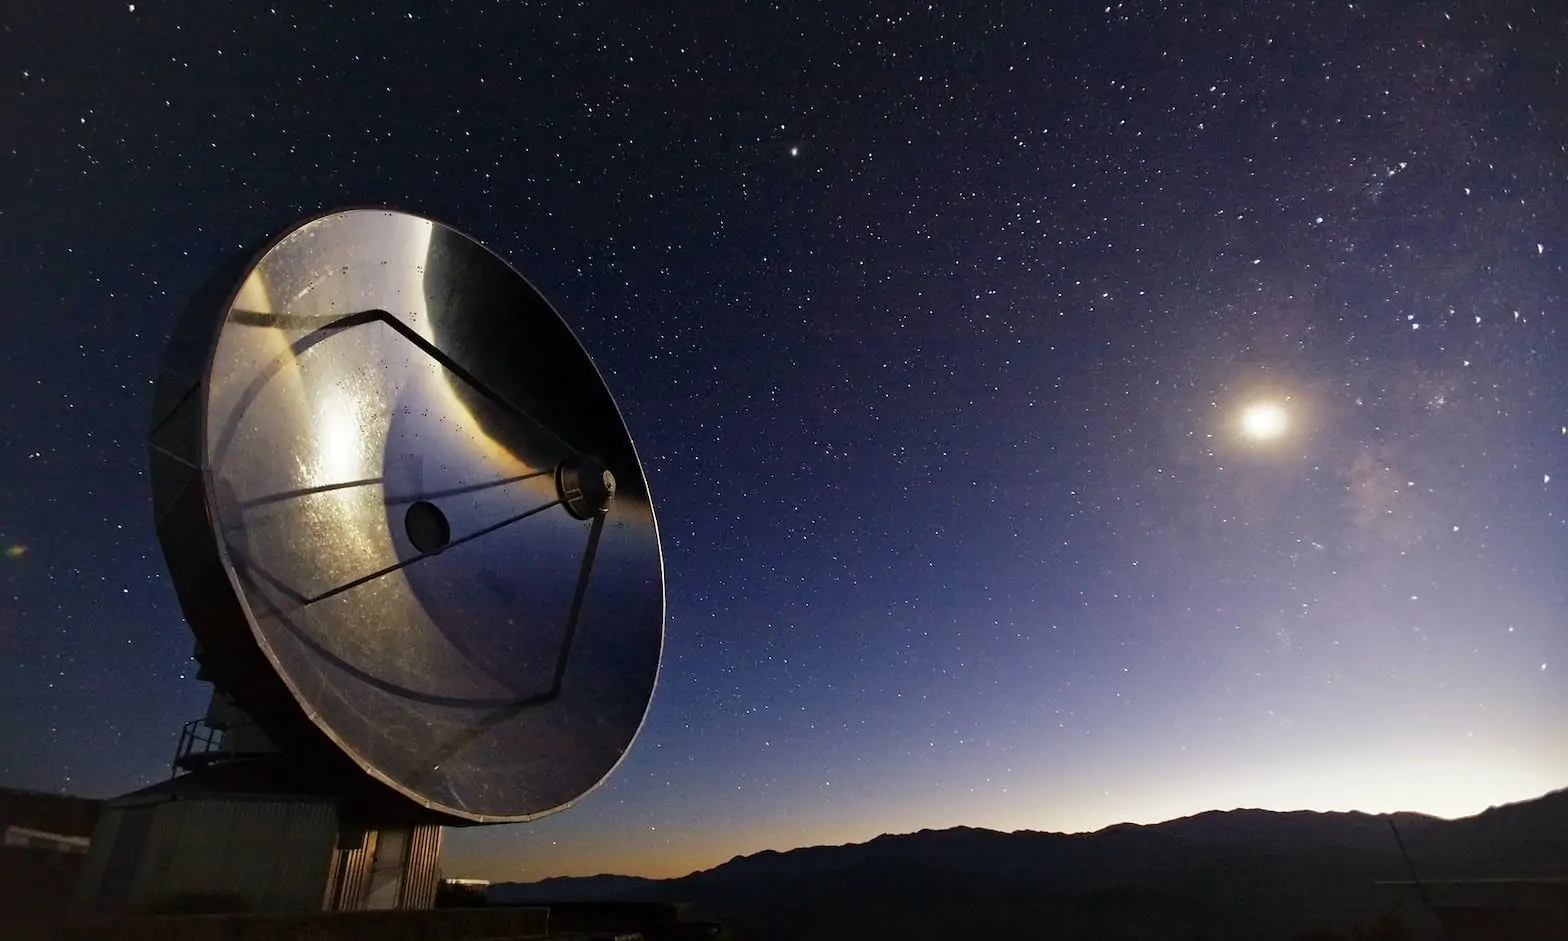 Image of the Swedish-ESO 15m Submillimeter Telescope (SEST) at ESO's La Silla Observatory, located on the outskirts of the Chilean Atacama Desert